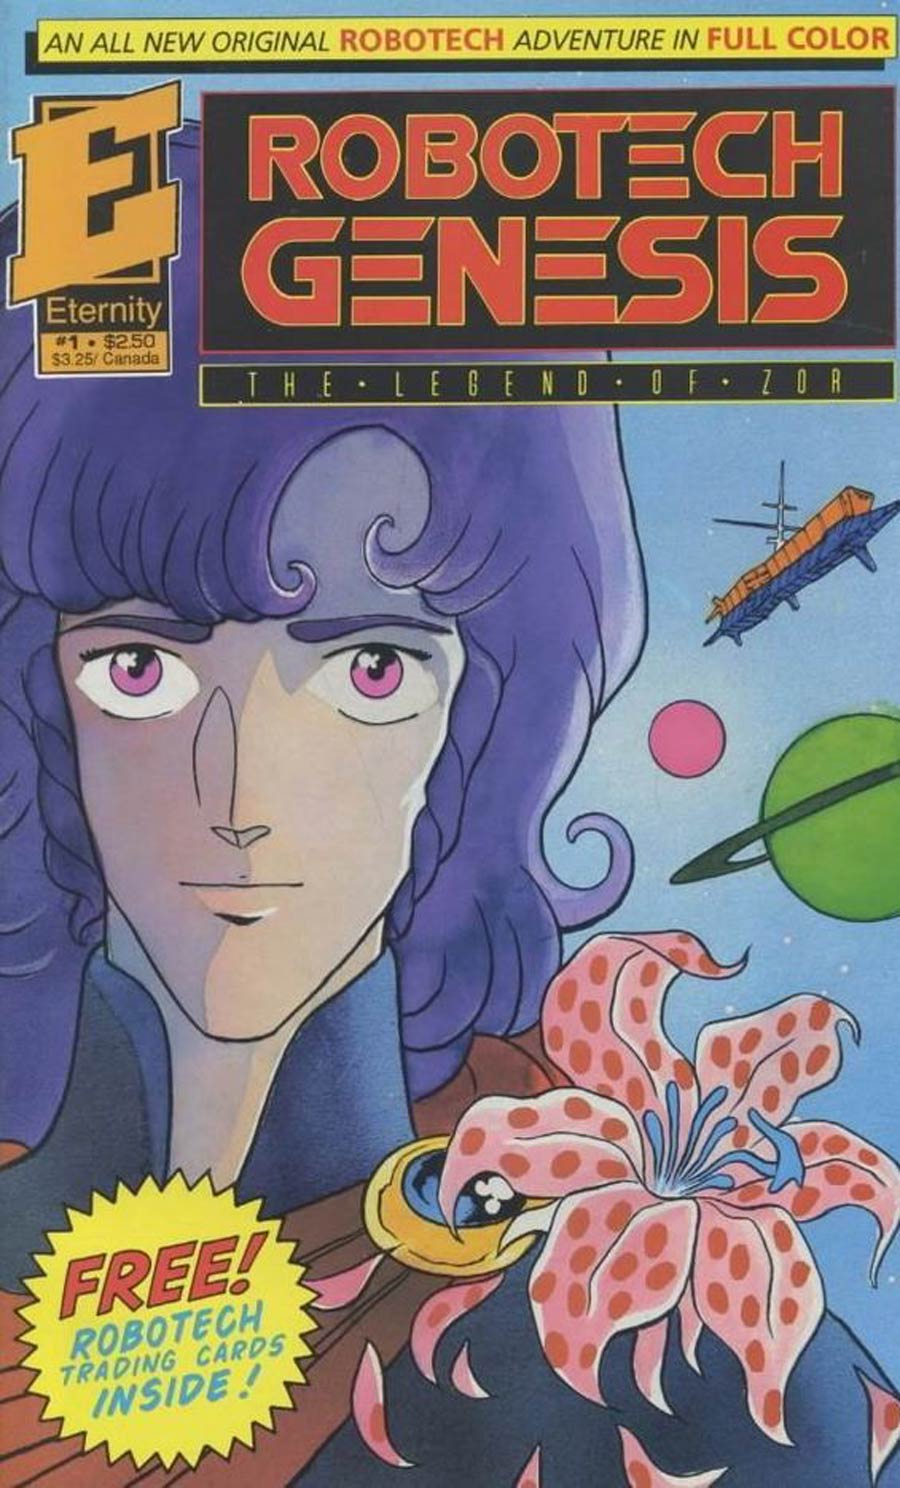 Robotech Genesis The Legend Of Zor #1 Cover B Regular Edition Without Cards